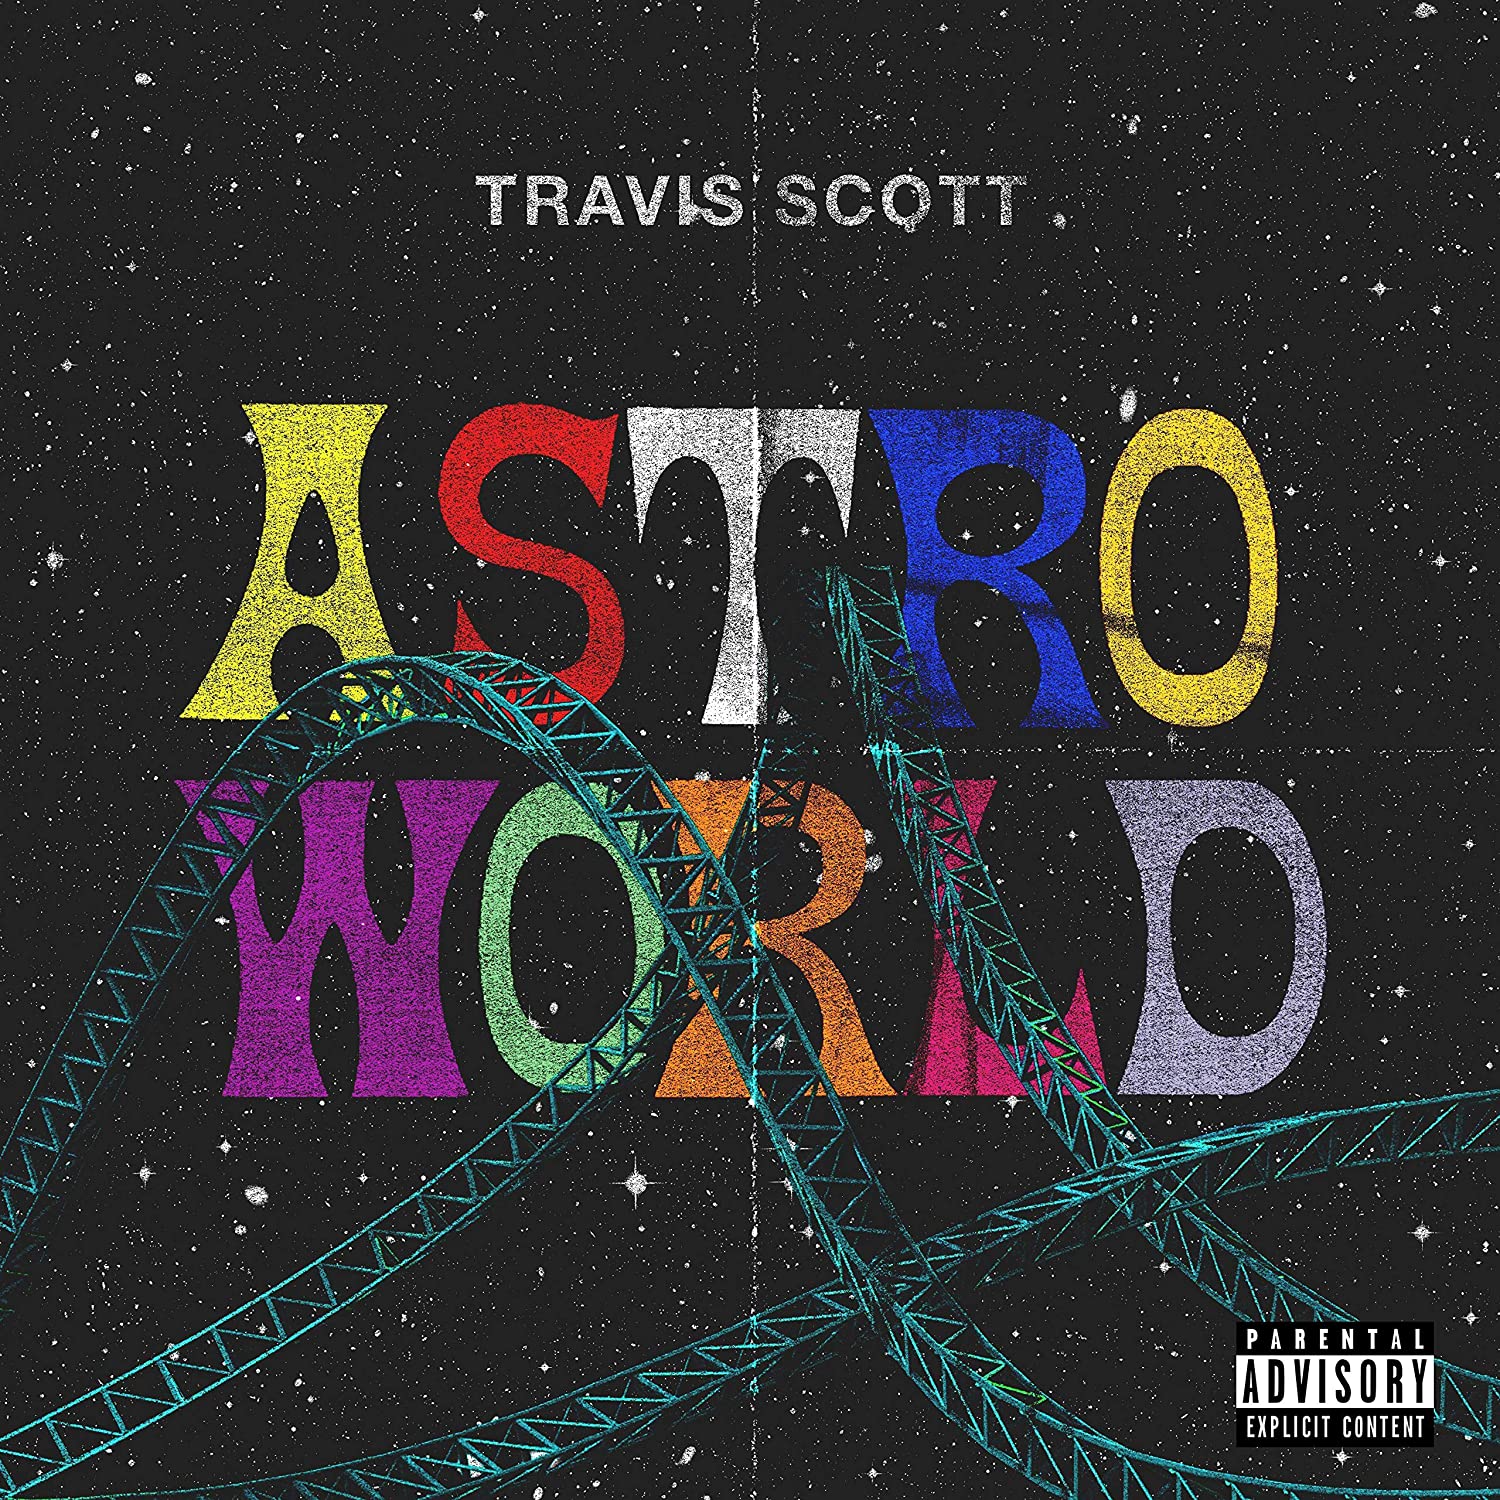 Buy Astroworld Unframed 20x20 Inches Art Poster Print Astroworld Merch